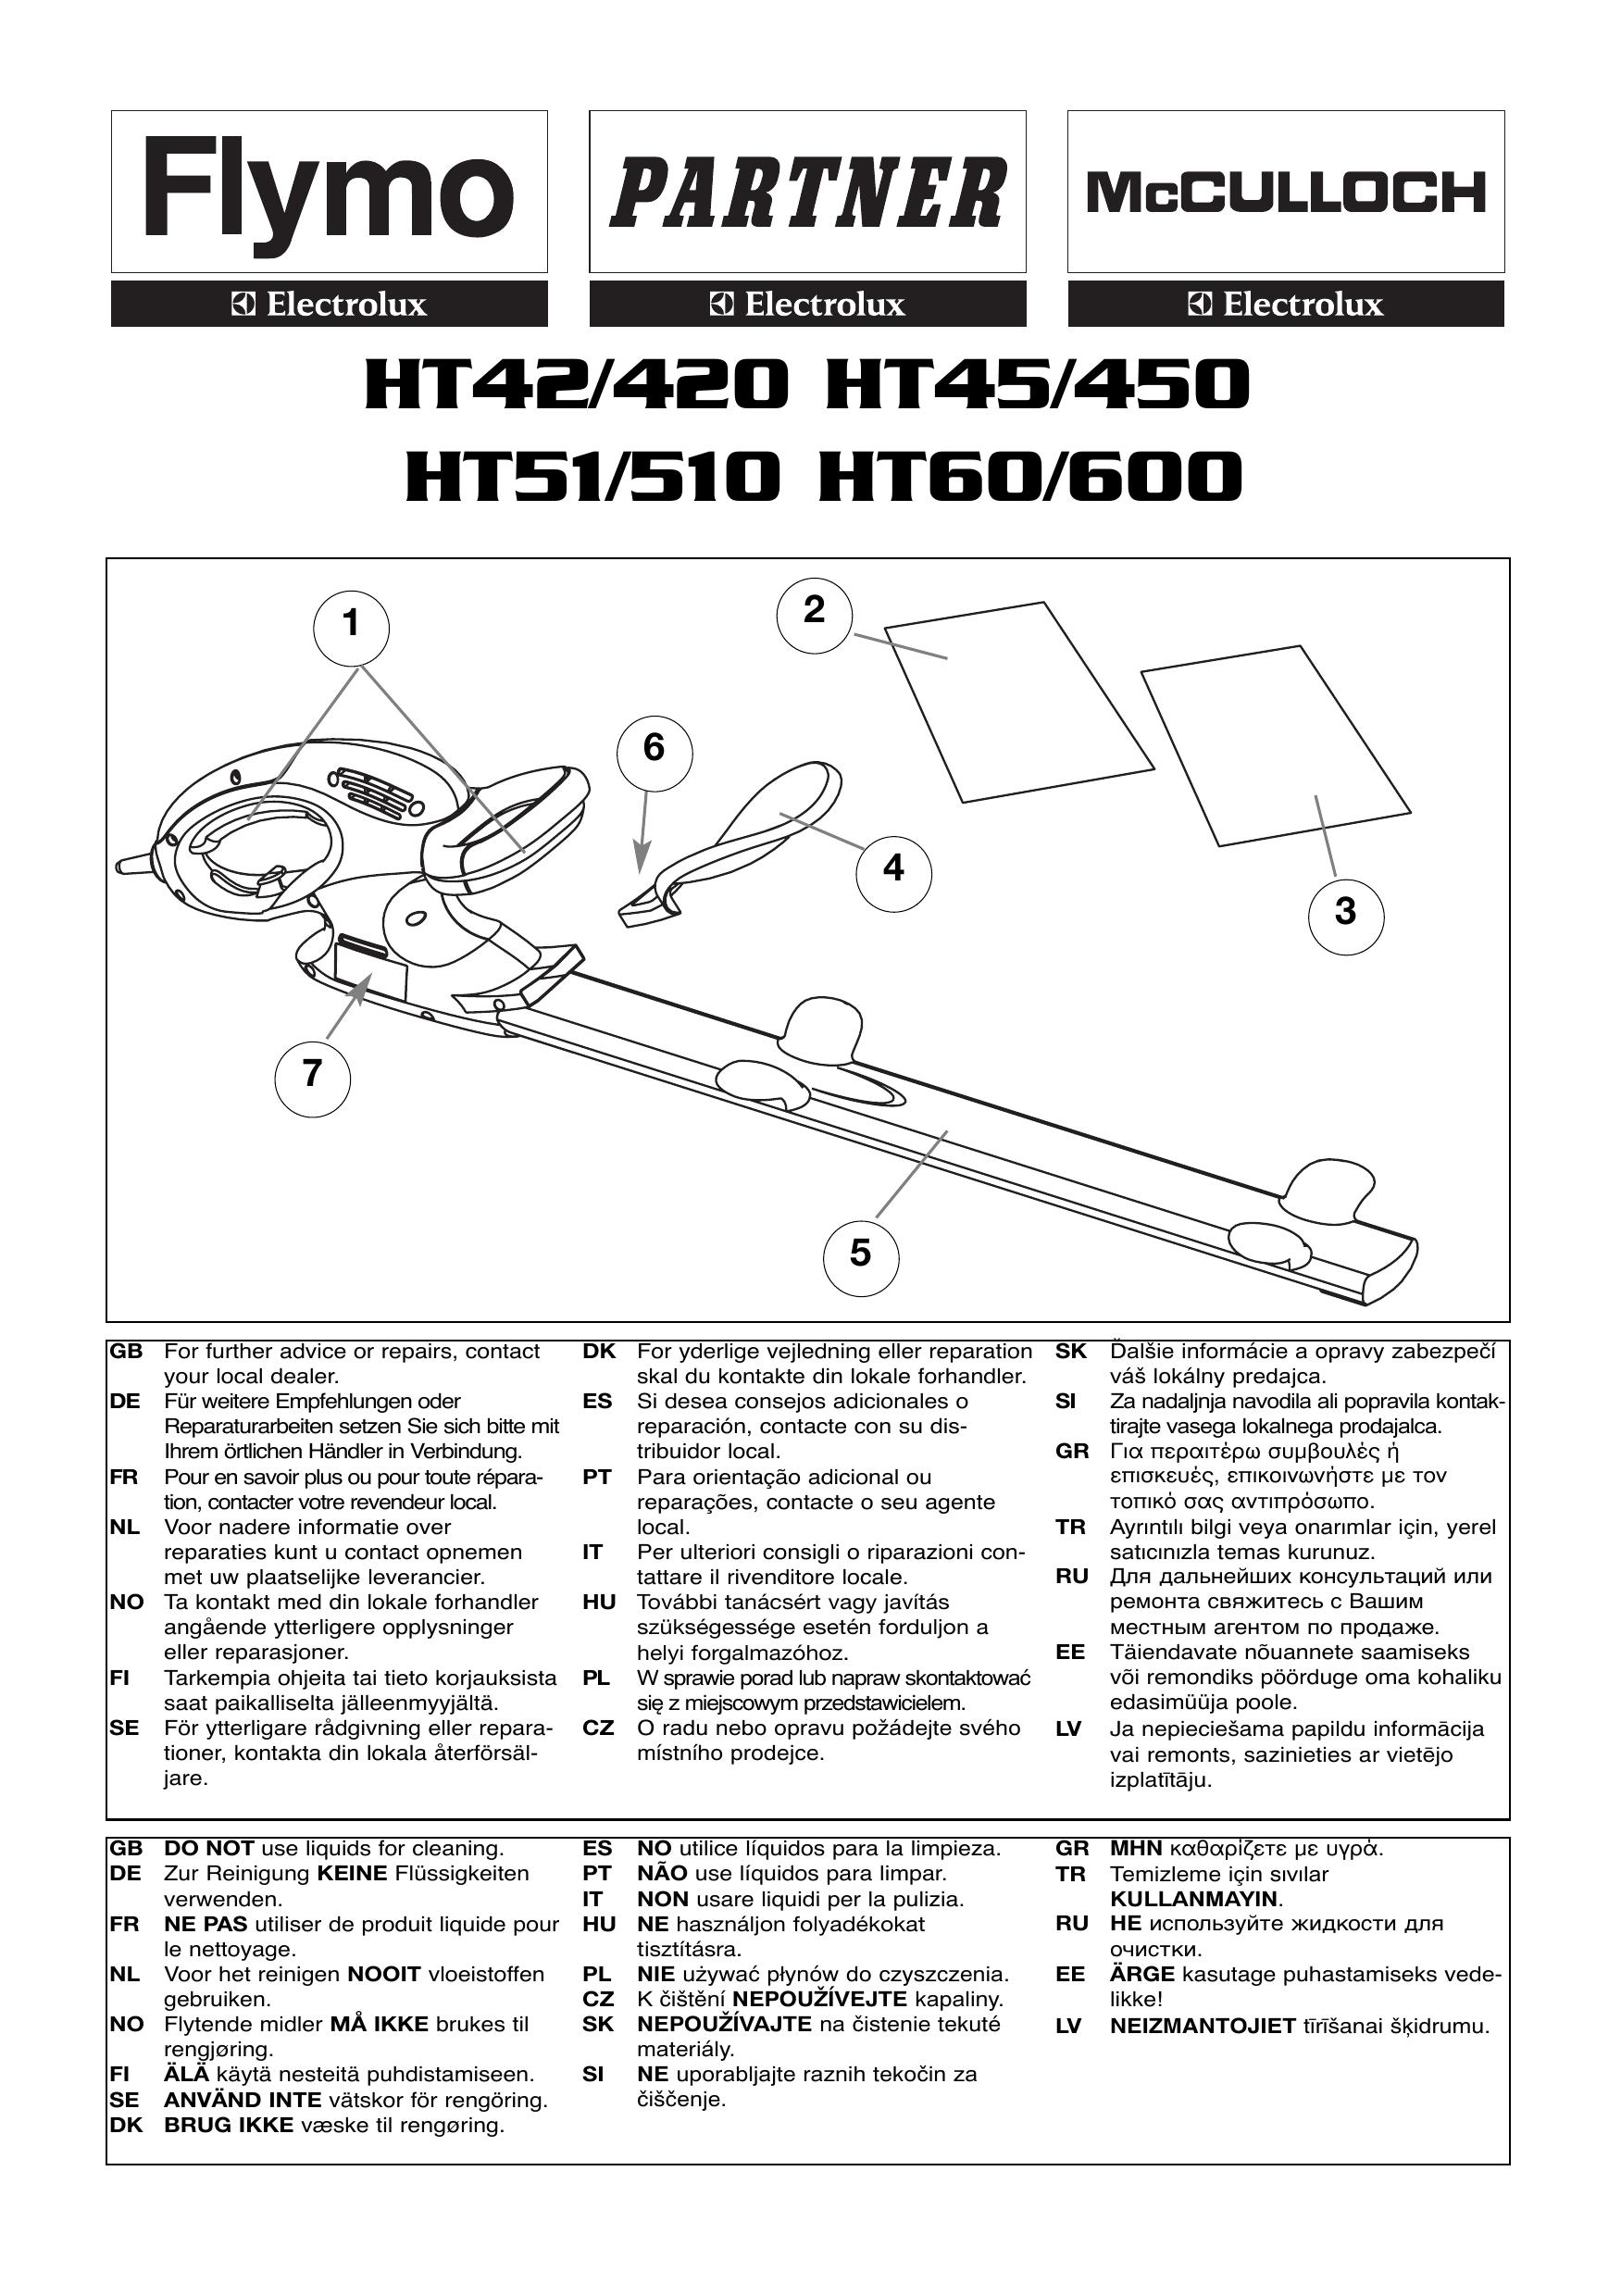 Flymo HT51/510 Trimmer User Manual